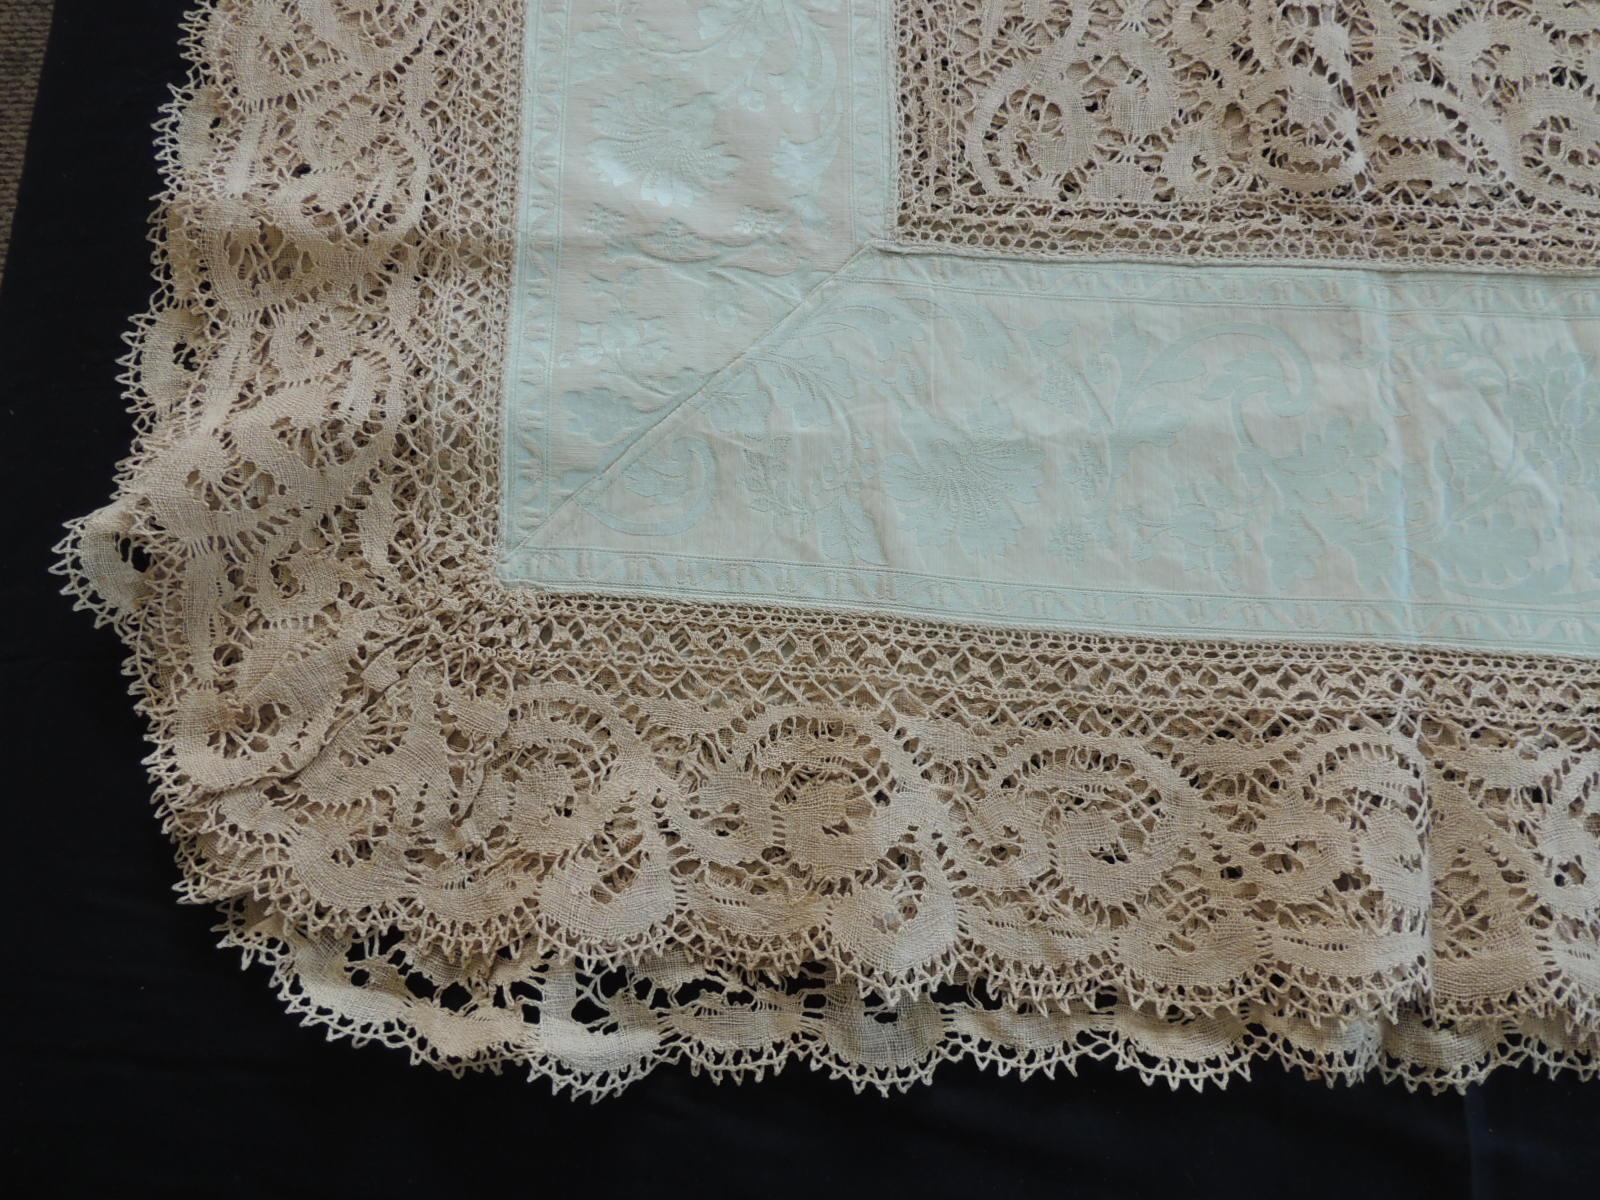 Hand-Crafted Bobbin Lace and Damask Bed Topper with Large Lace Center Panel